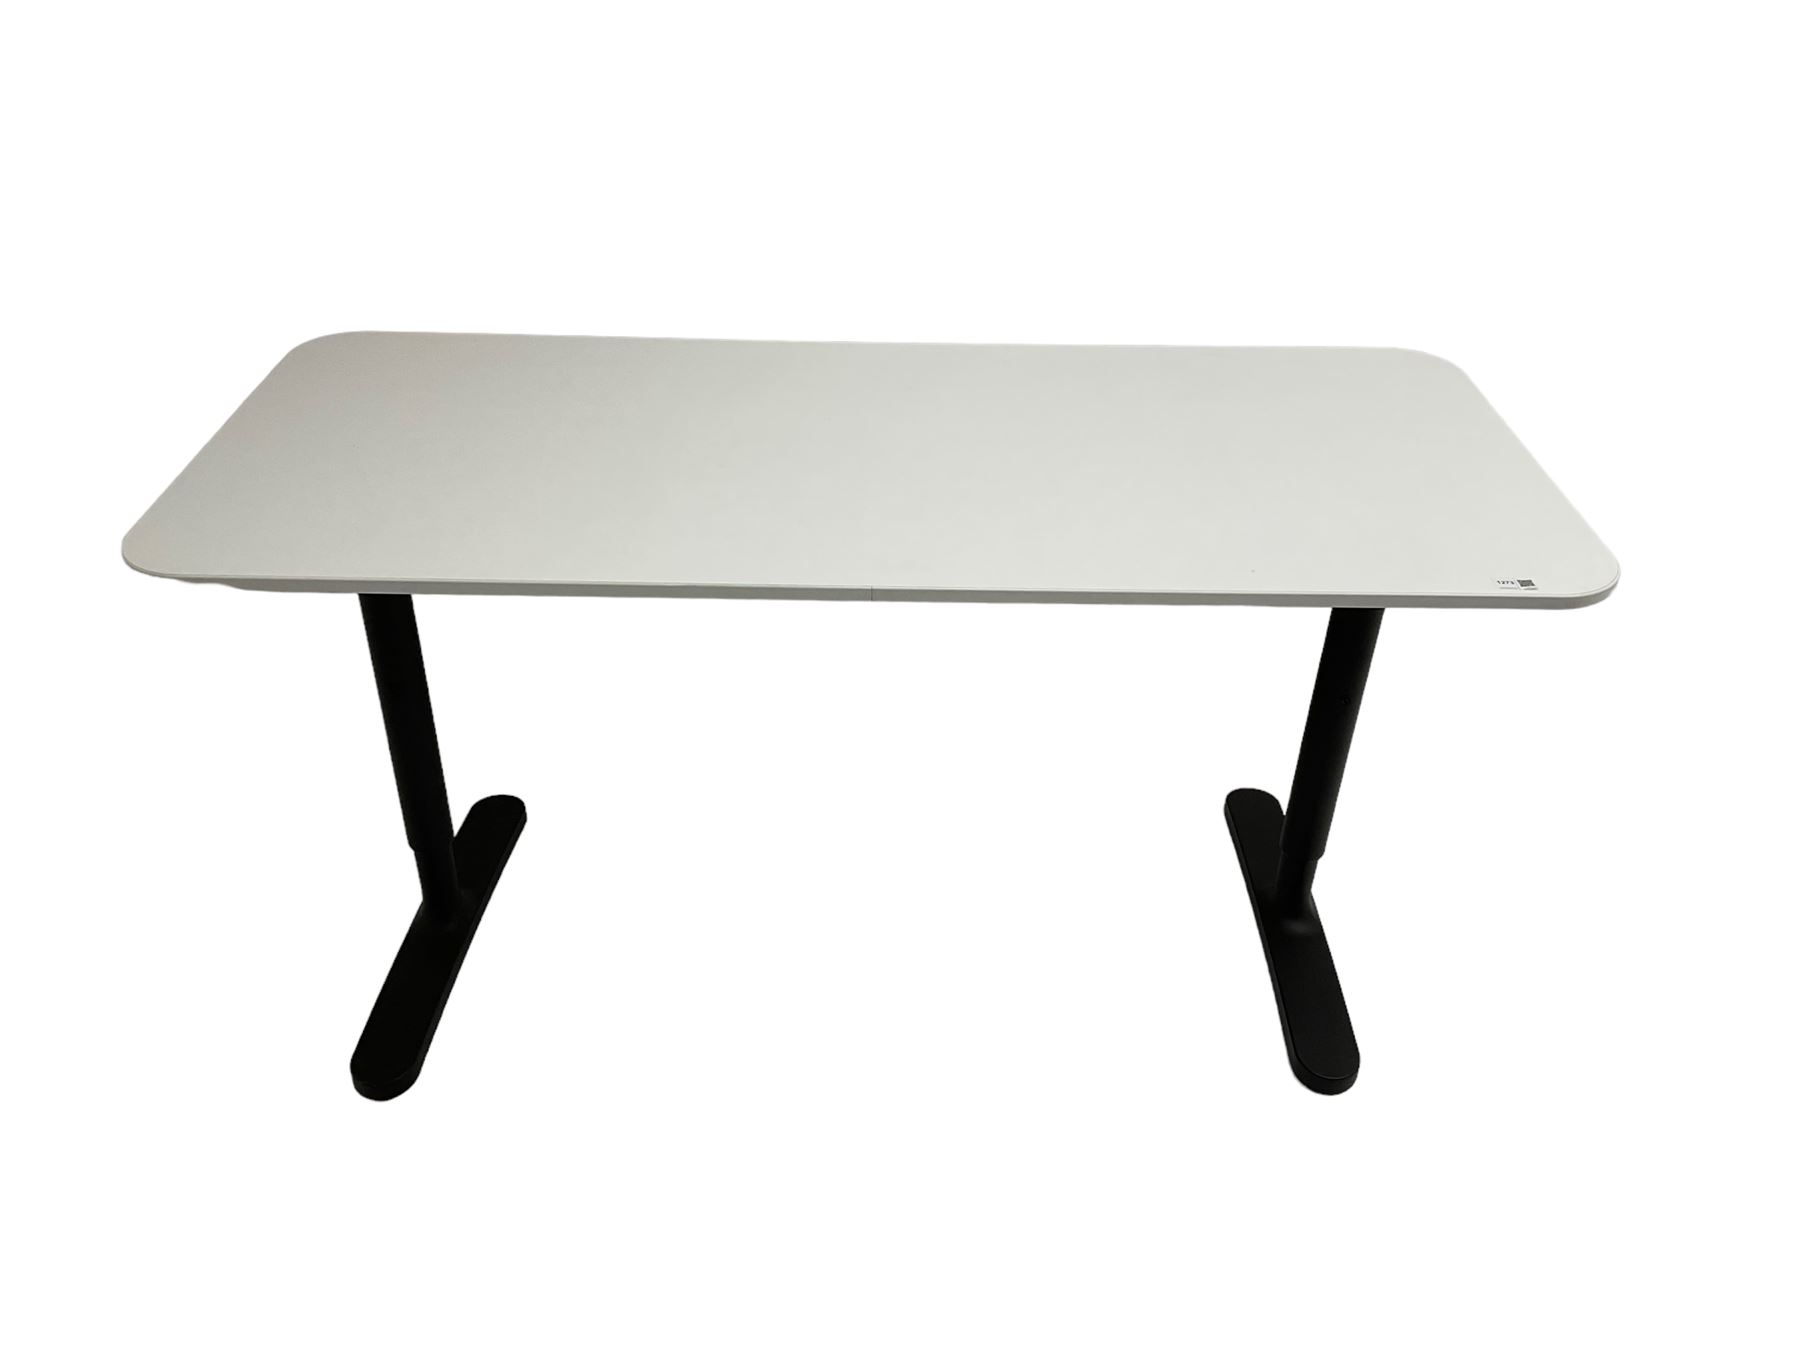 IKEA - contemporary table with white finish top - Image 3 of 6